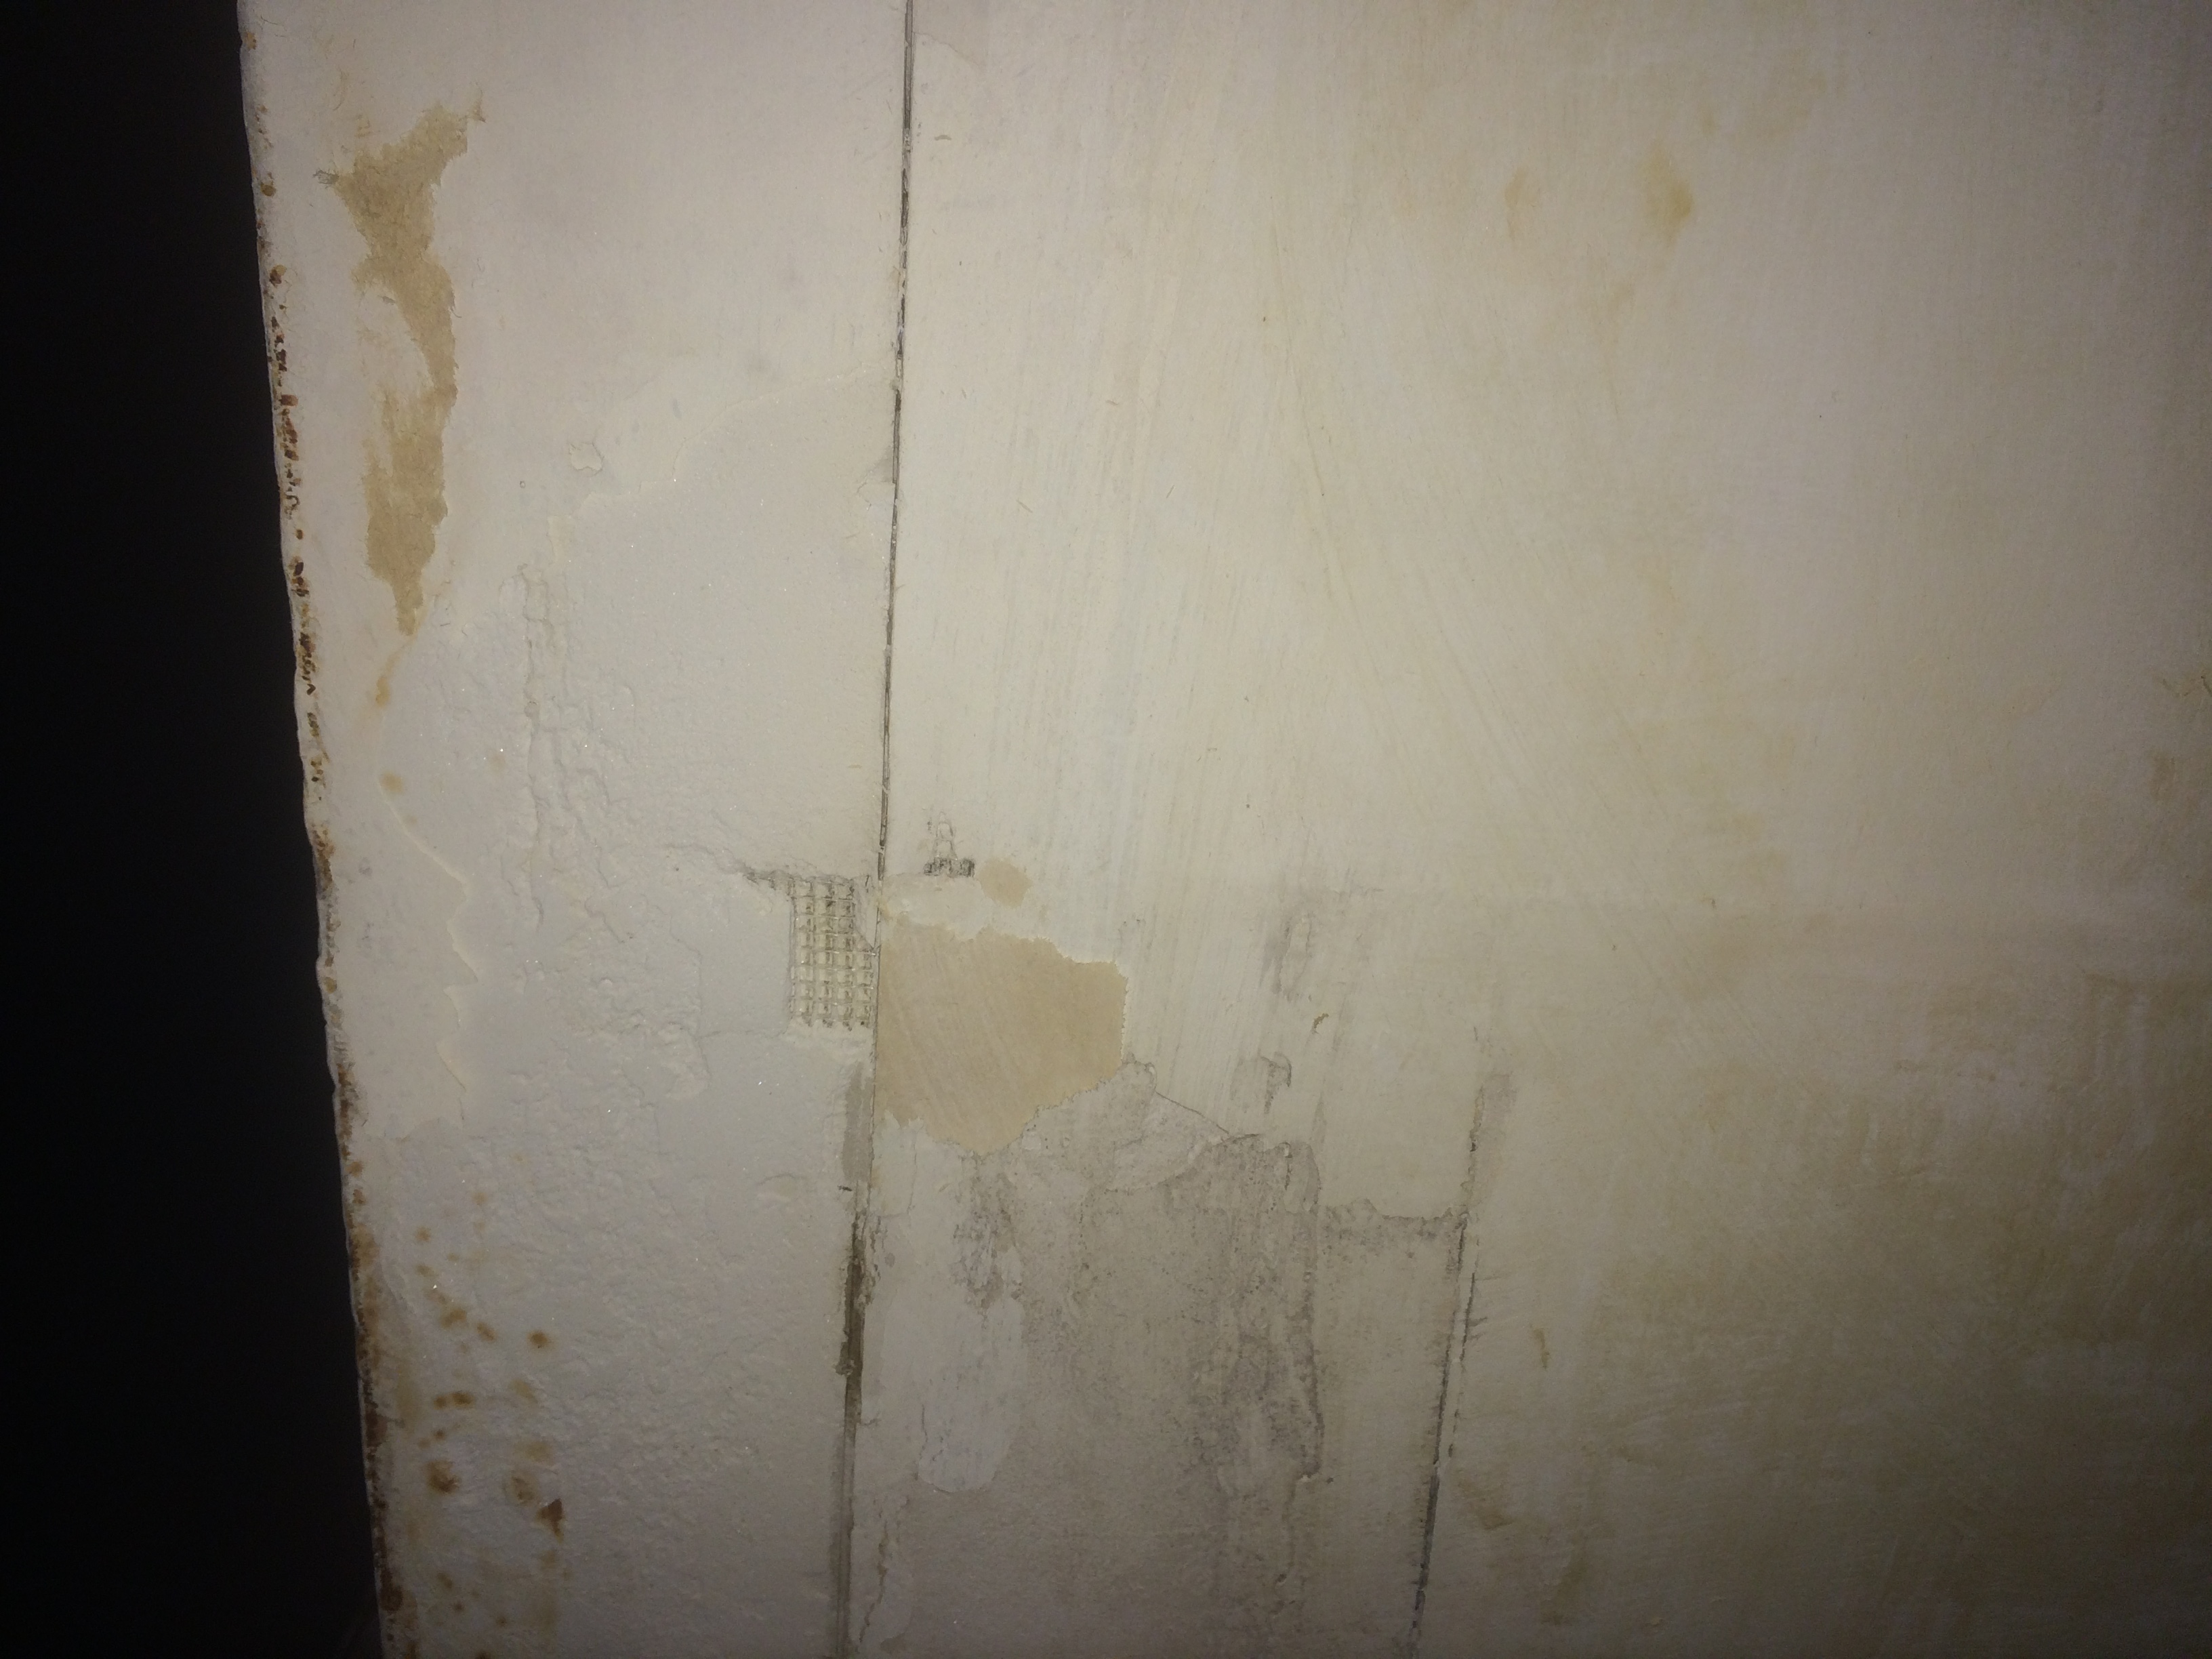 Walls gouged from workers basically digging knives into the paper.